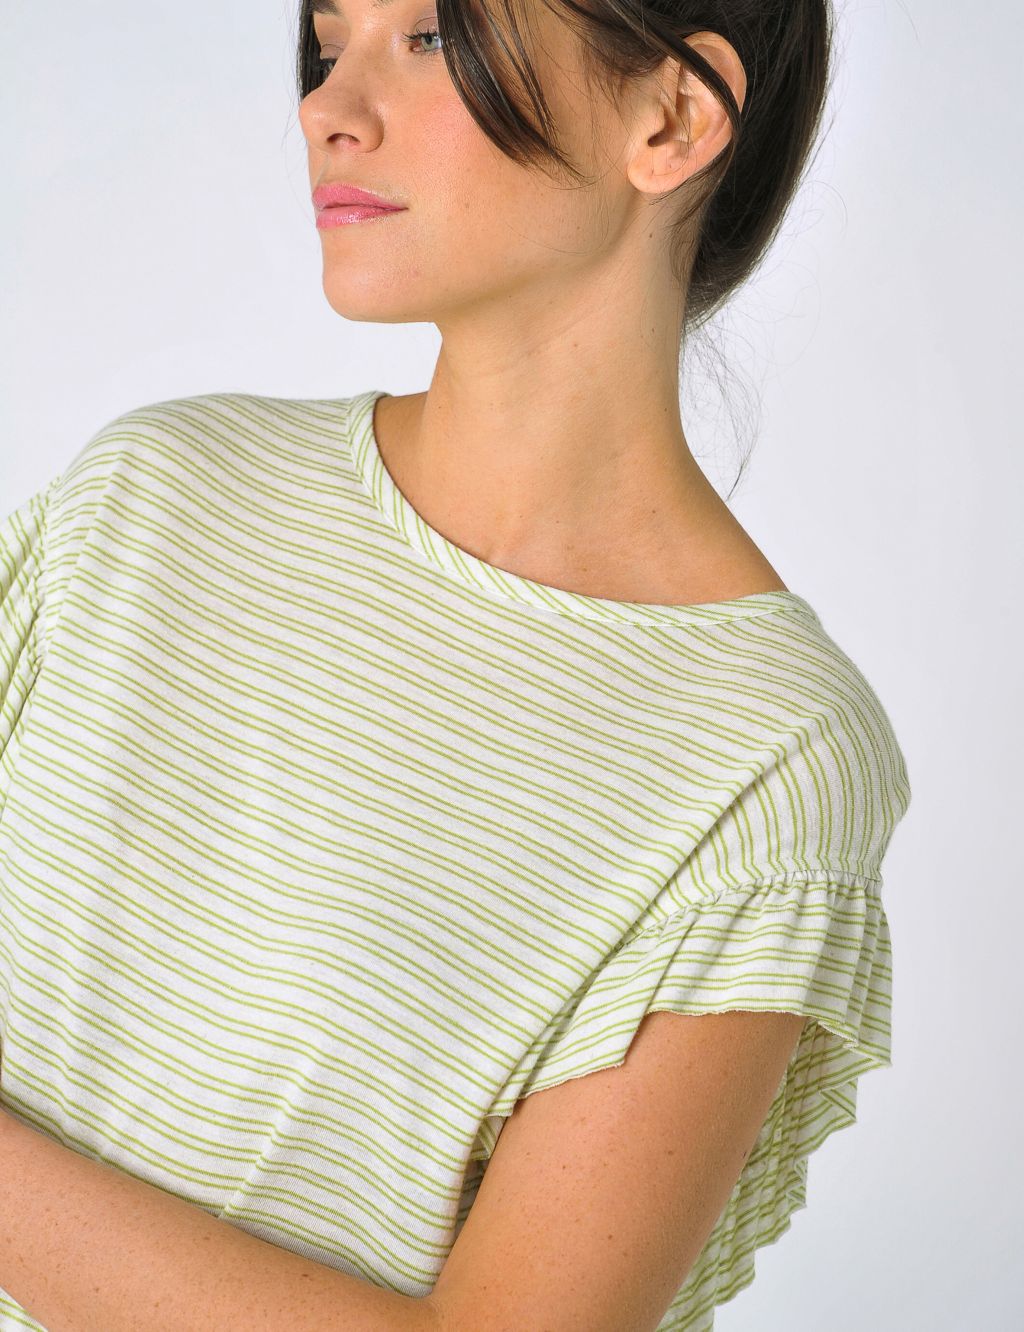 Jersey Striped Frill Detail Top image 4